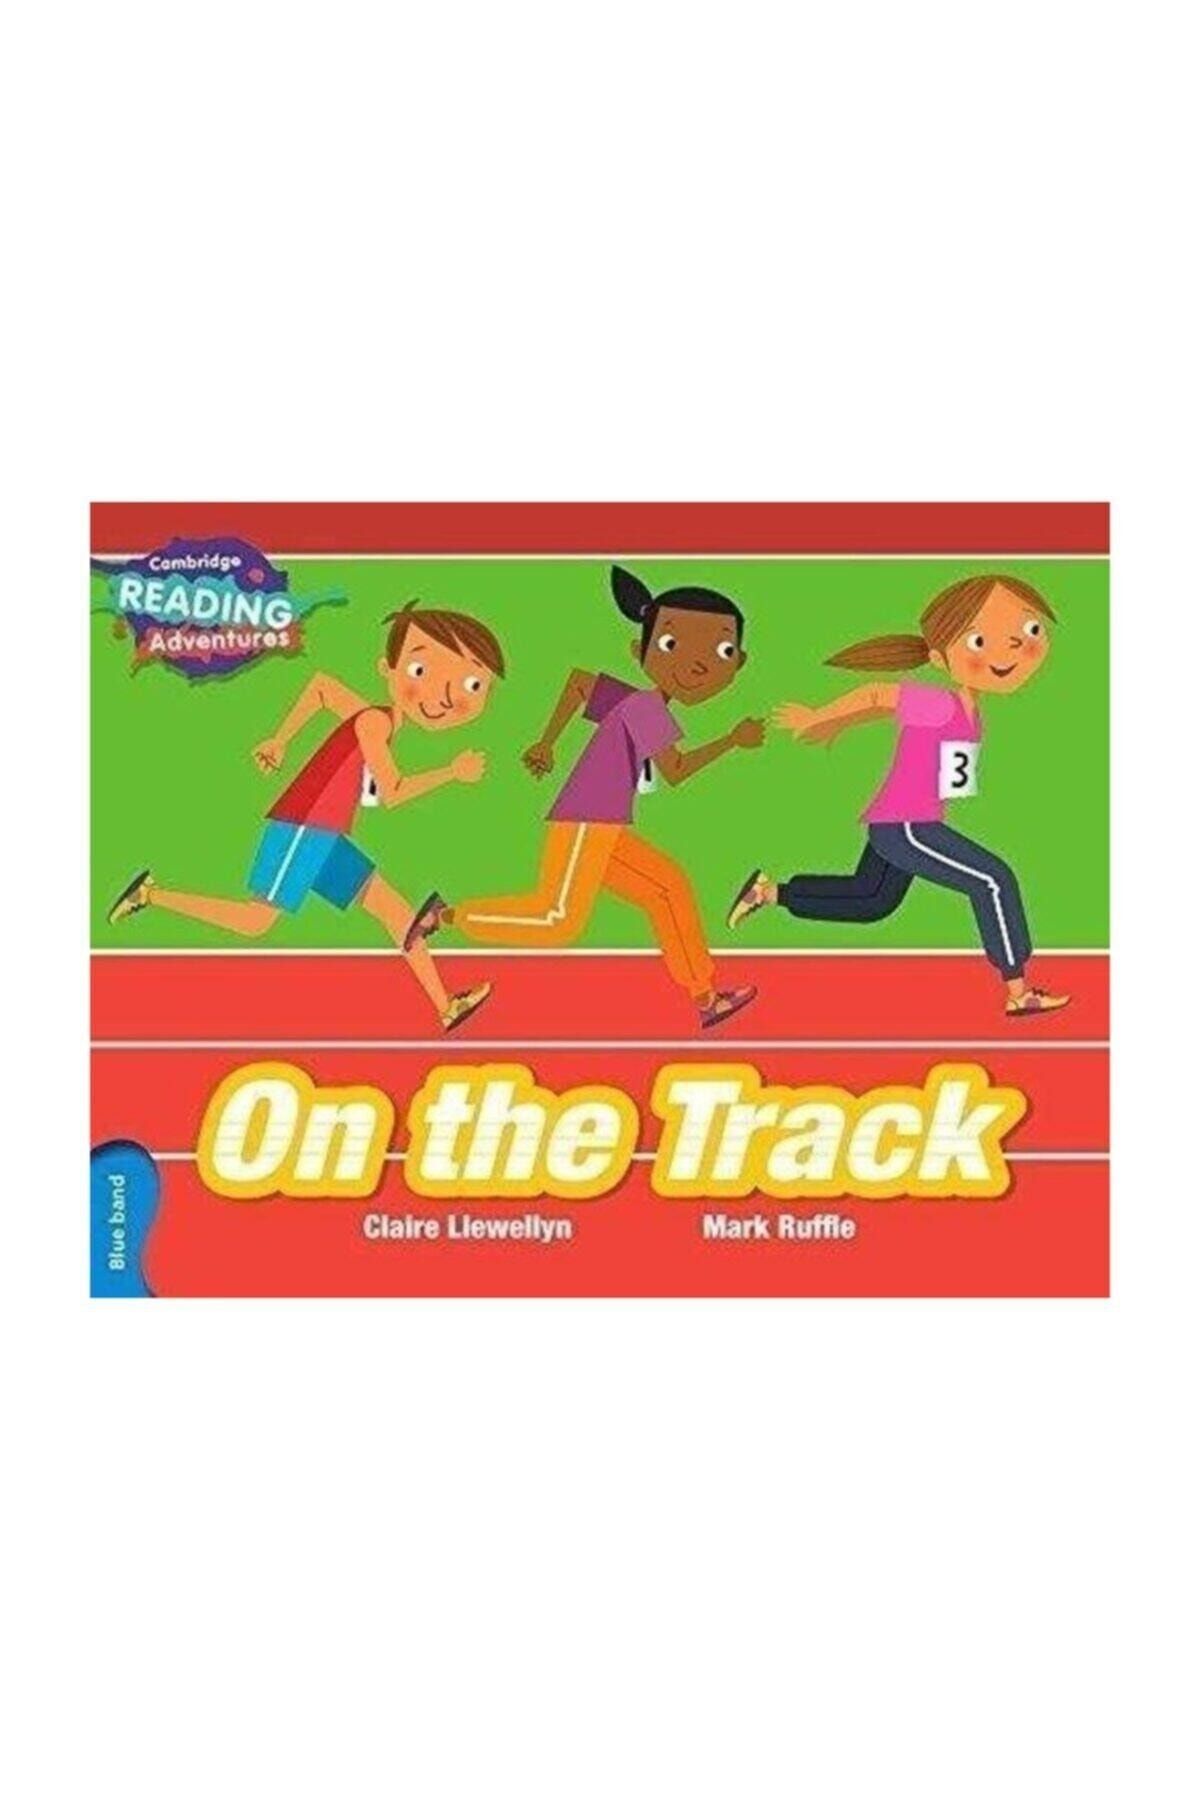 Cambridge University Blue Band- On The Track Reading Adventures Claire Llewellyn